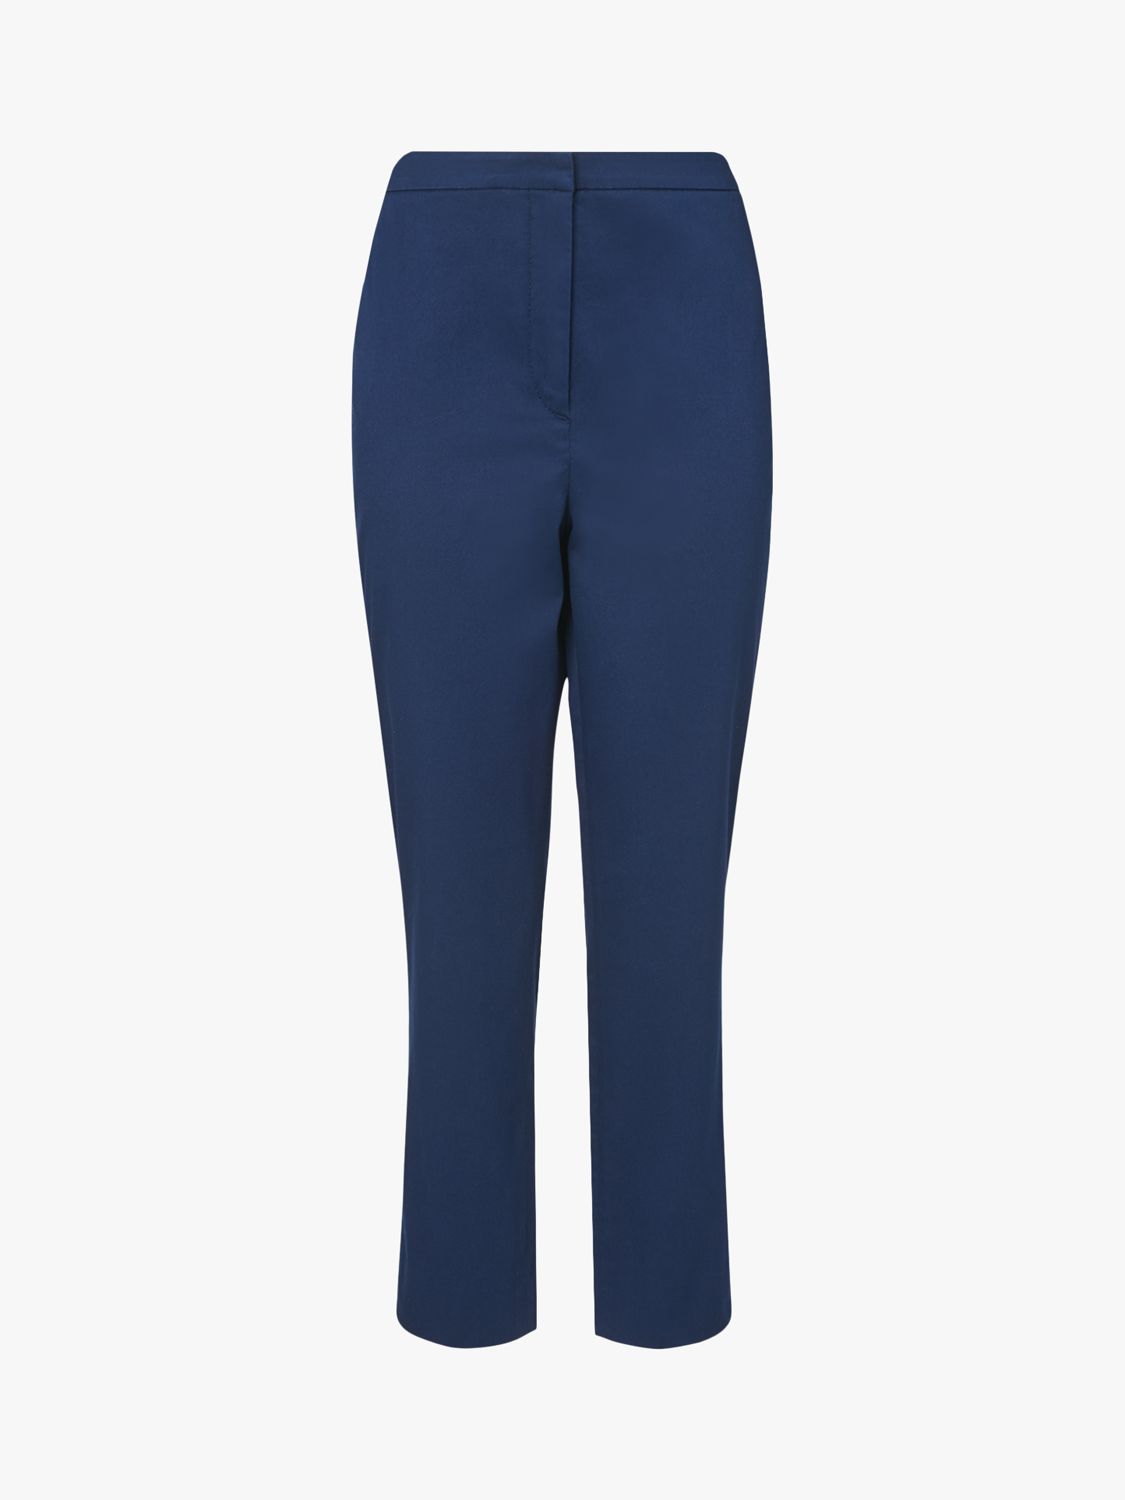 L.K.Bennett Sussex Tapered Trousers, Midnight at John Lewis & Partners